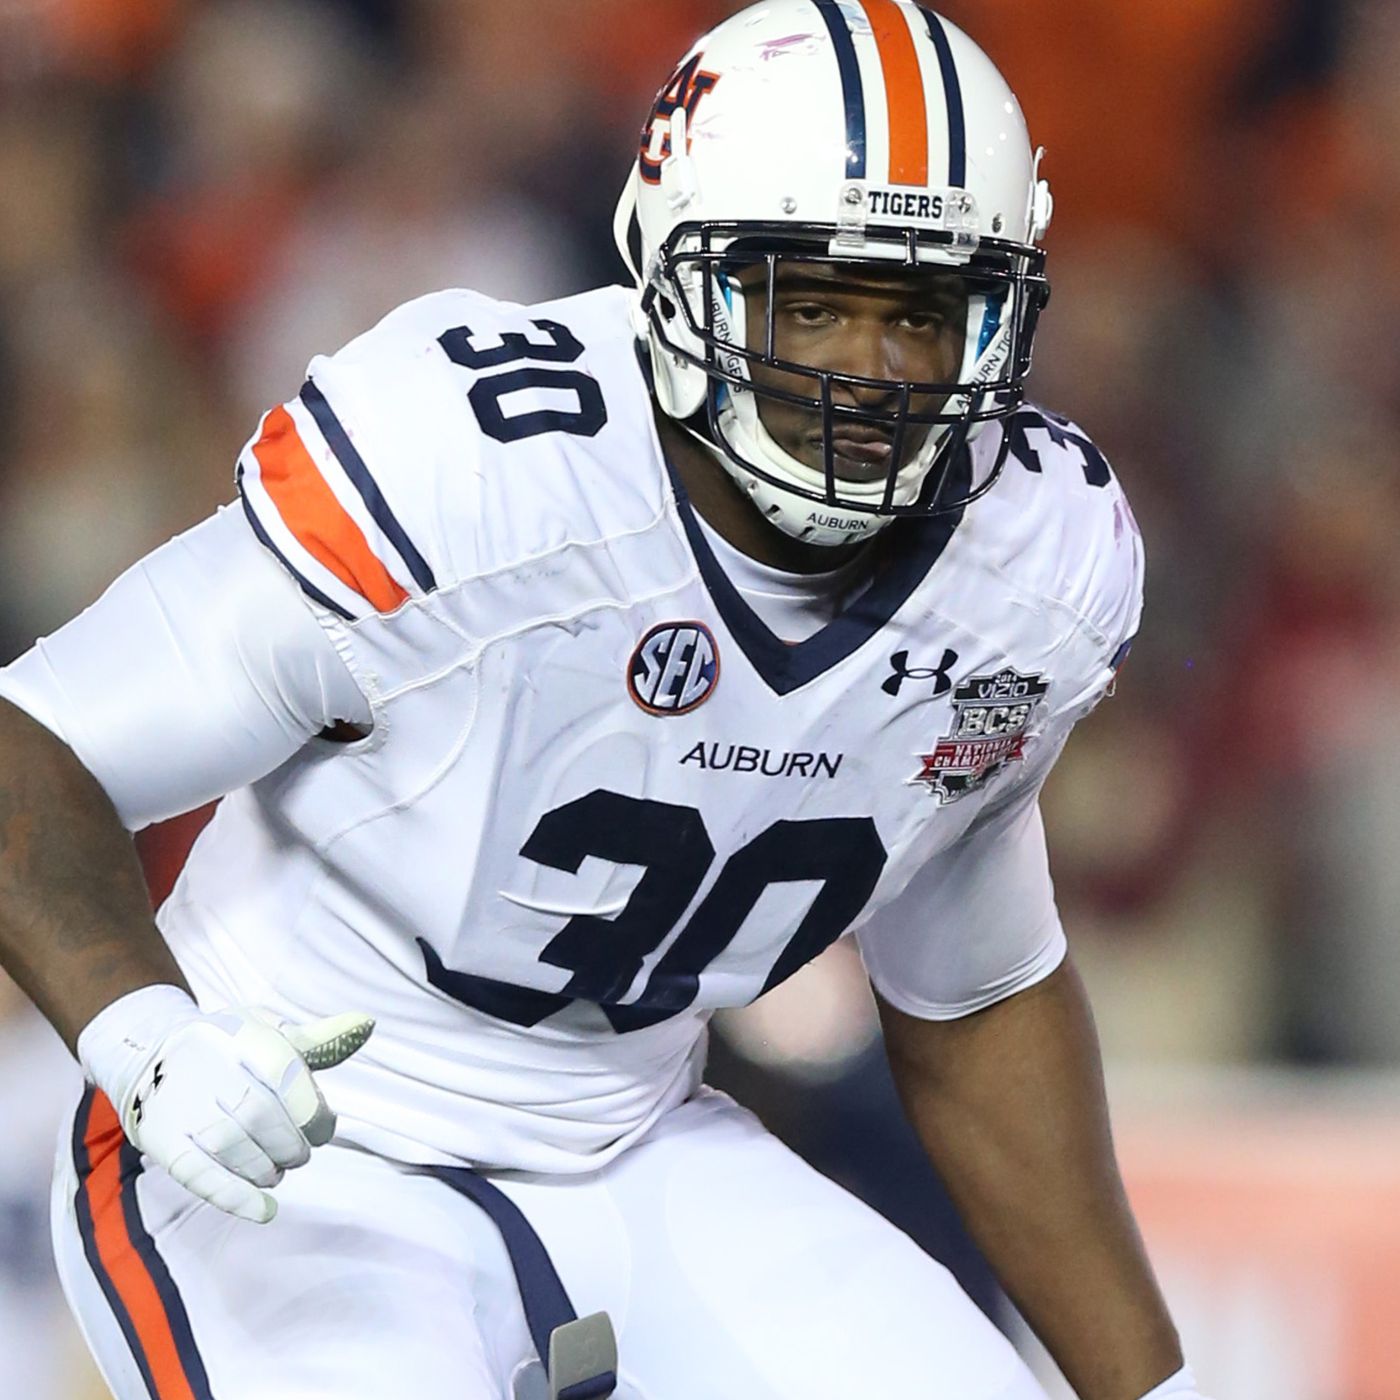 10 Things To Know About Auburn Lb Dee Ford Kansas City Chiefs First Round Pick Arrowhead Pride